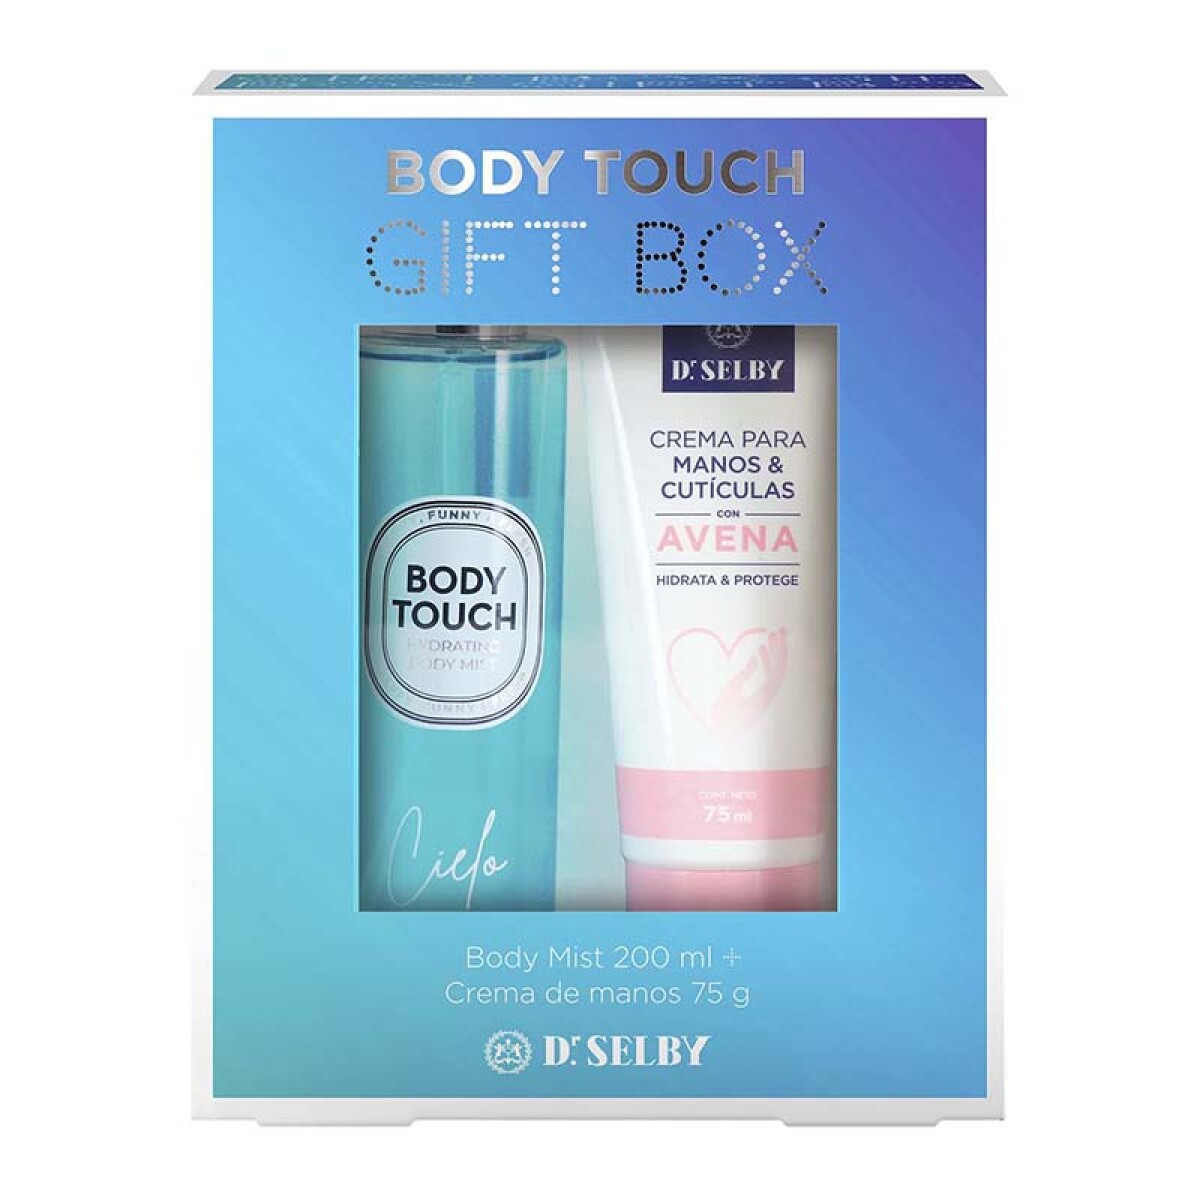 Body Touch gift box Dr Selby 